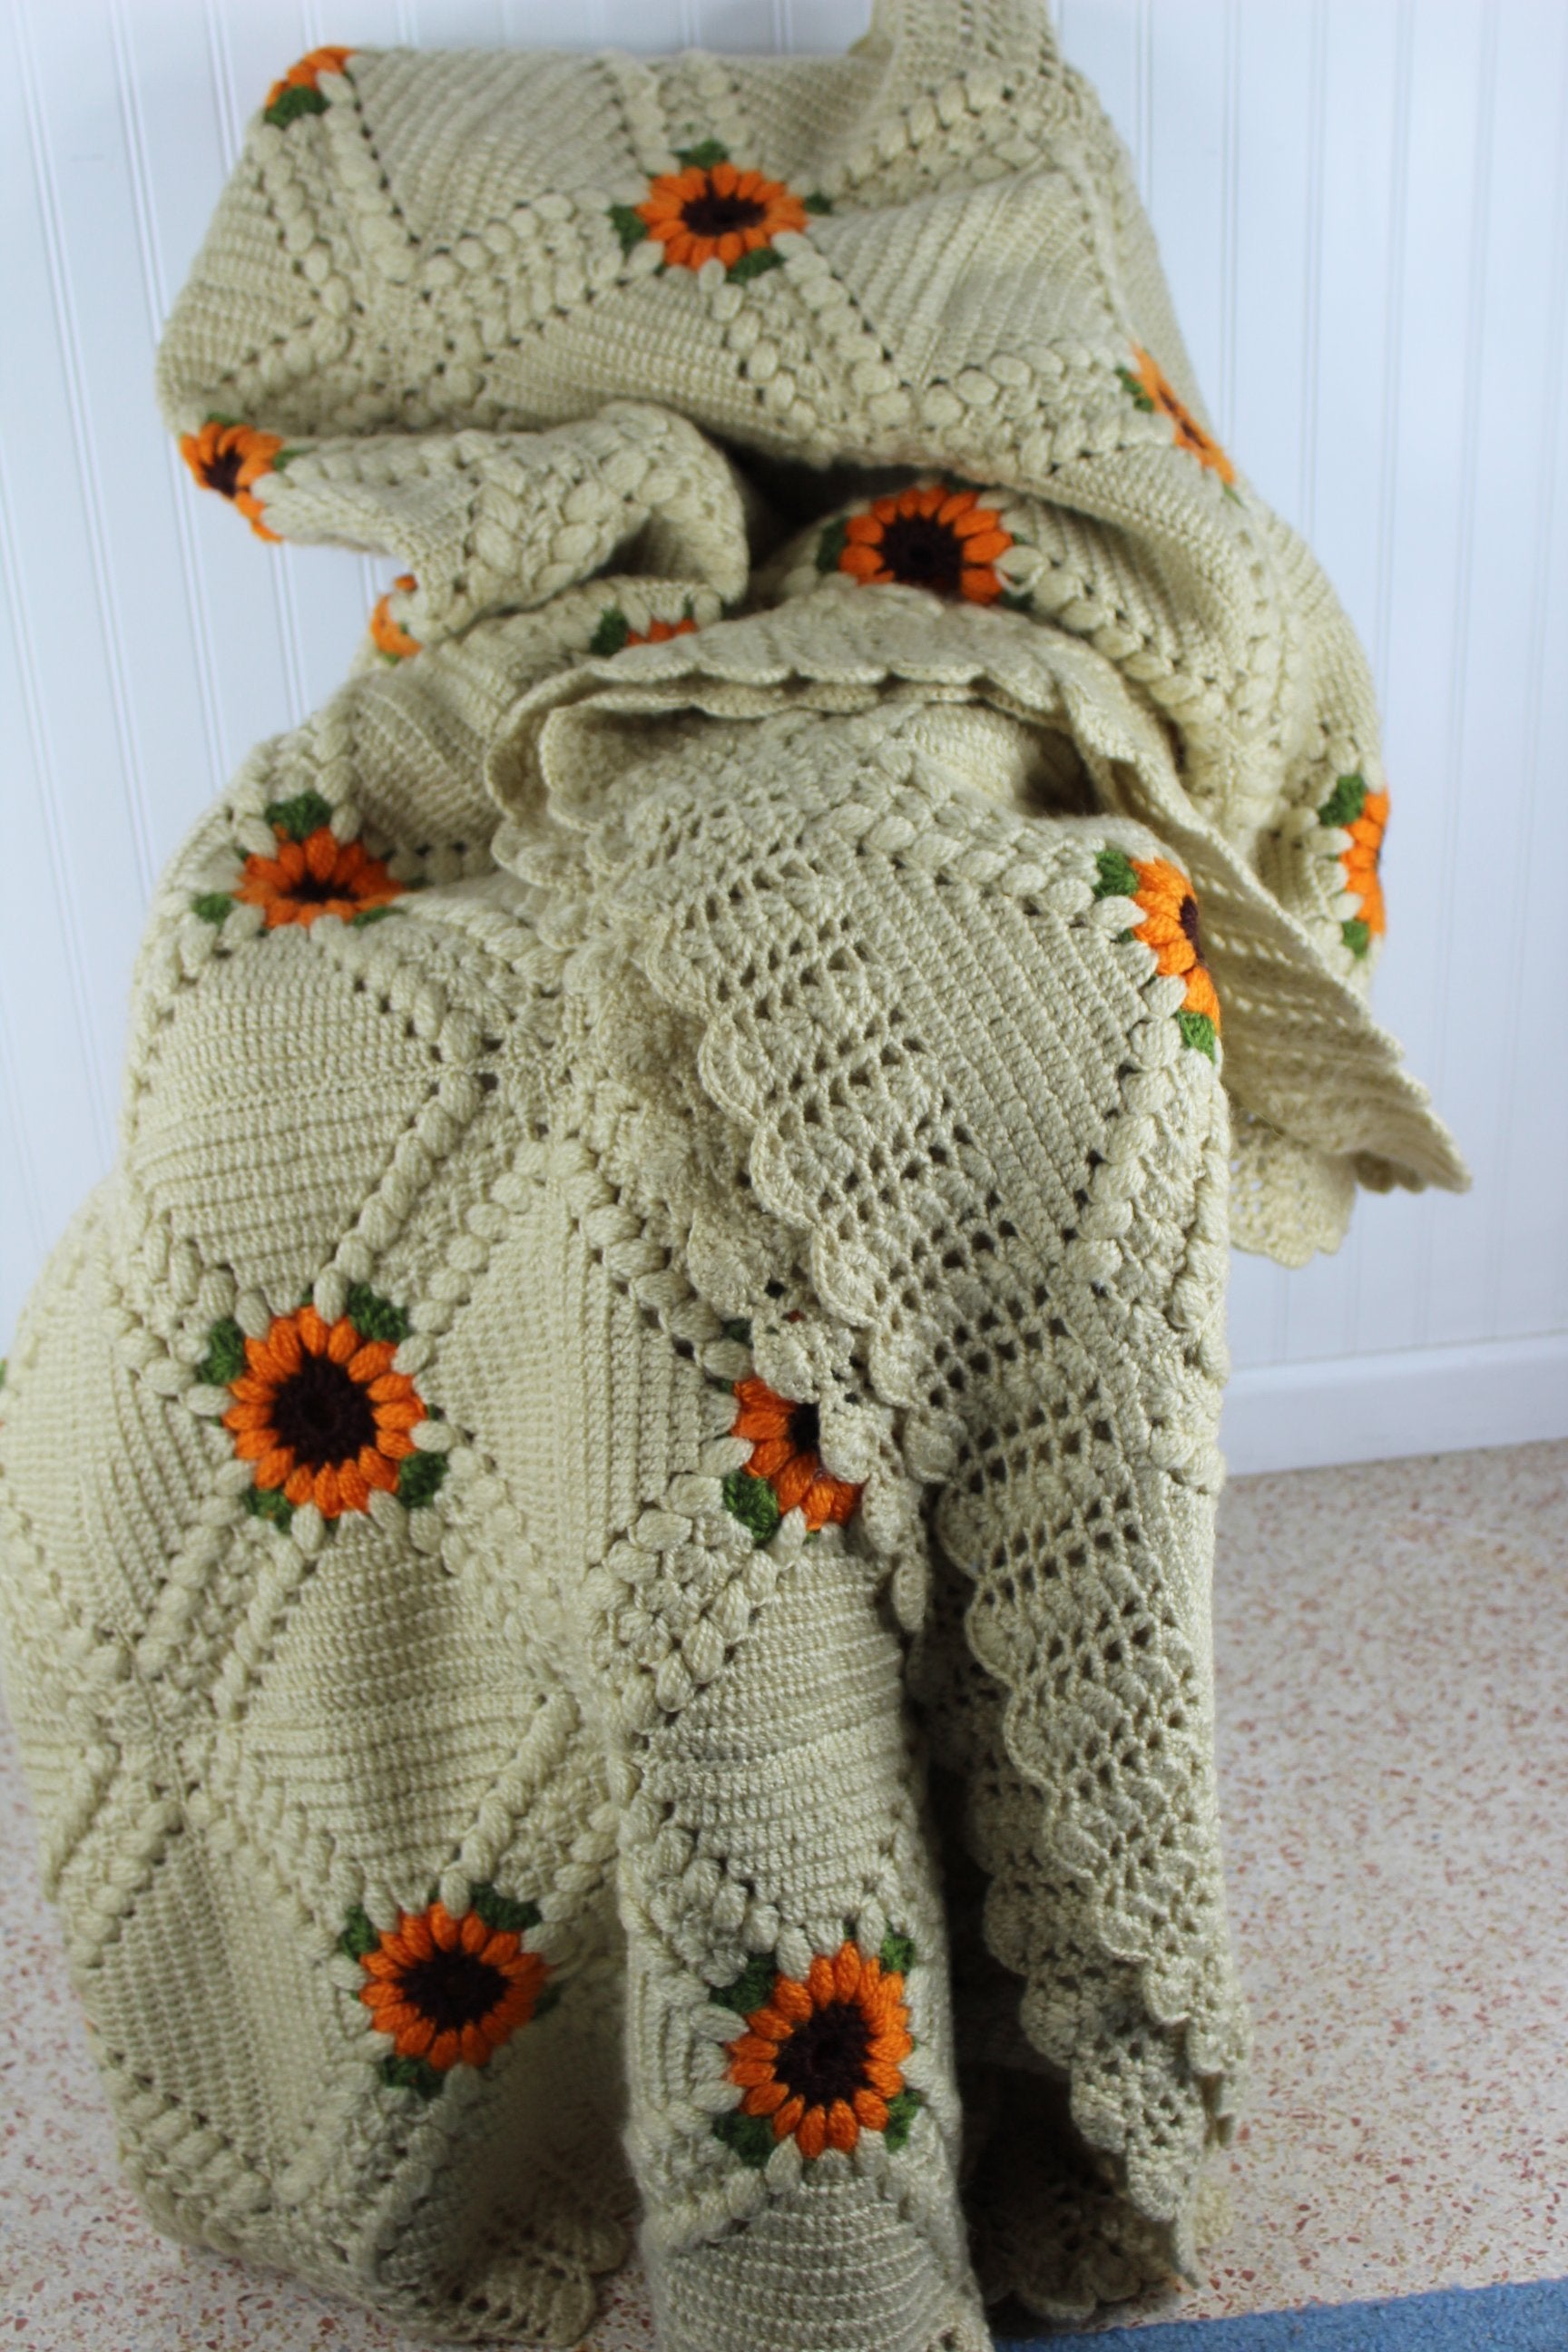 Heavy Crochet Coverlet Bedspread Sunflowers on Natural Diamond PatternDimensional Flowers Hand Made Large  incredible